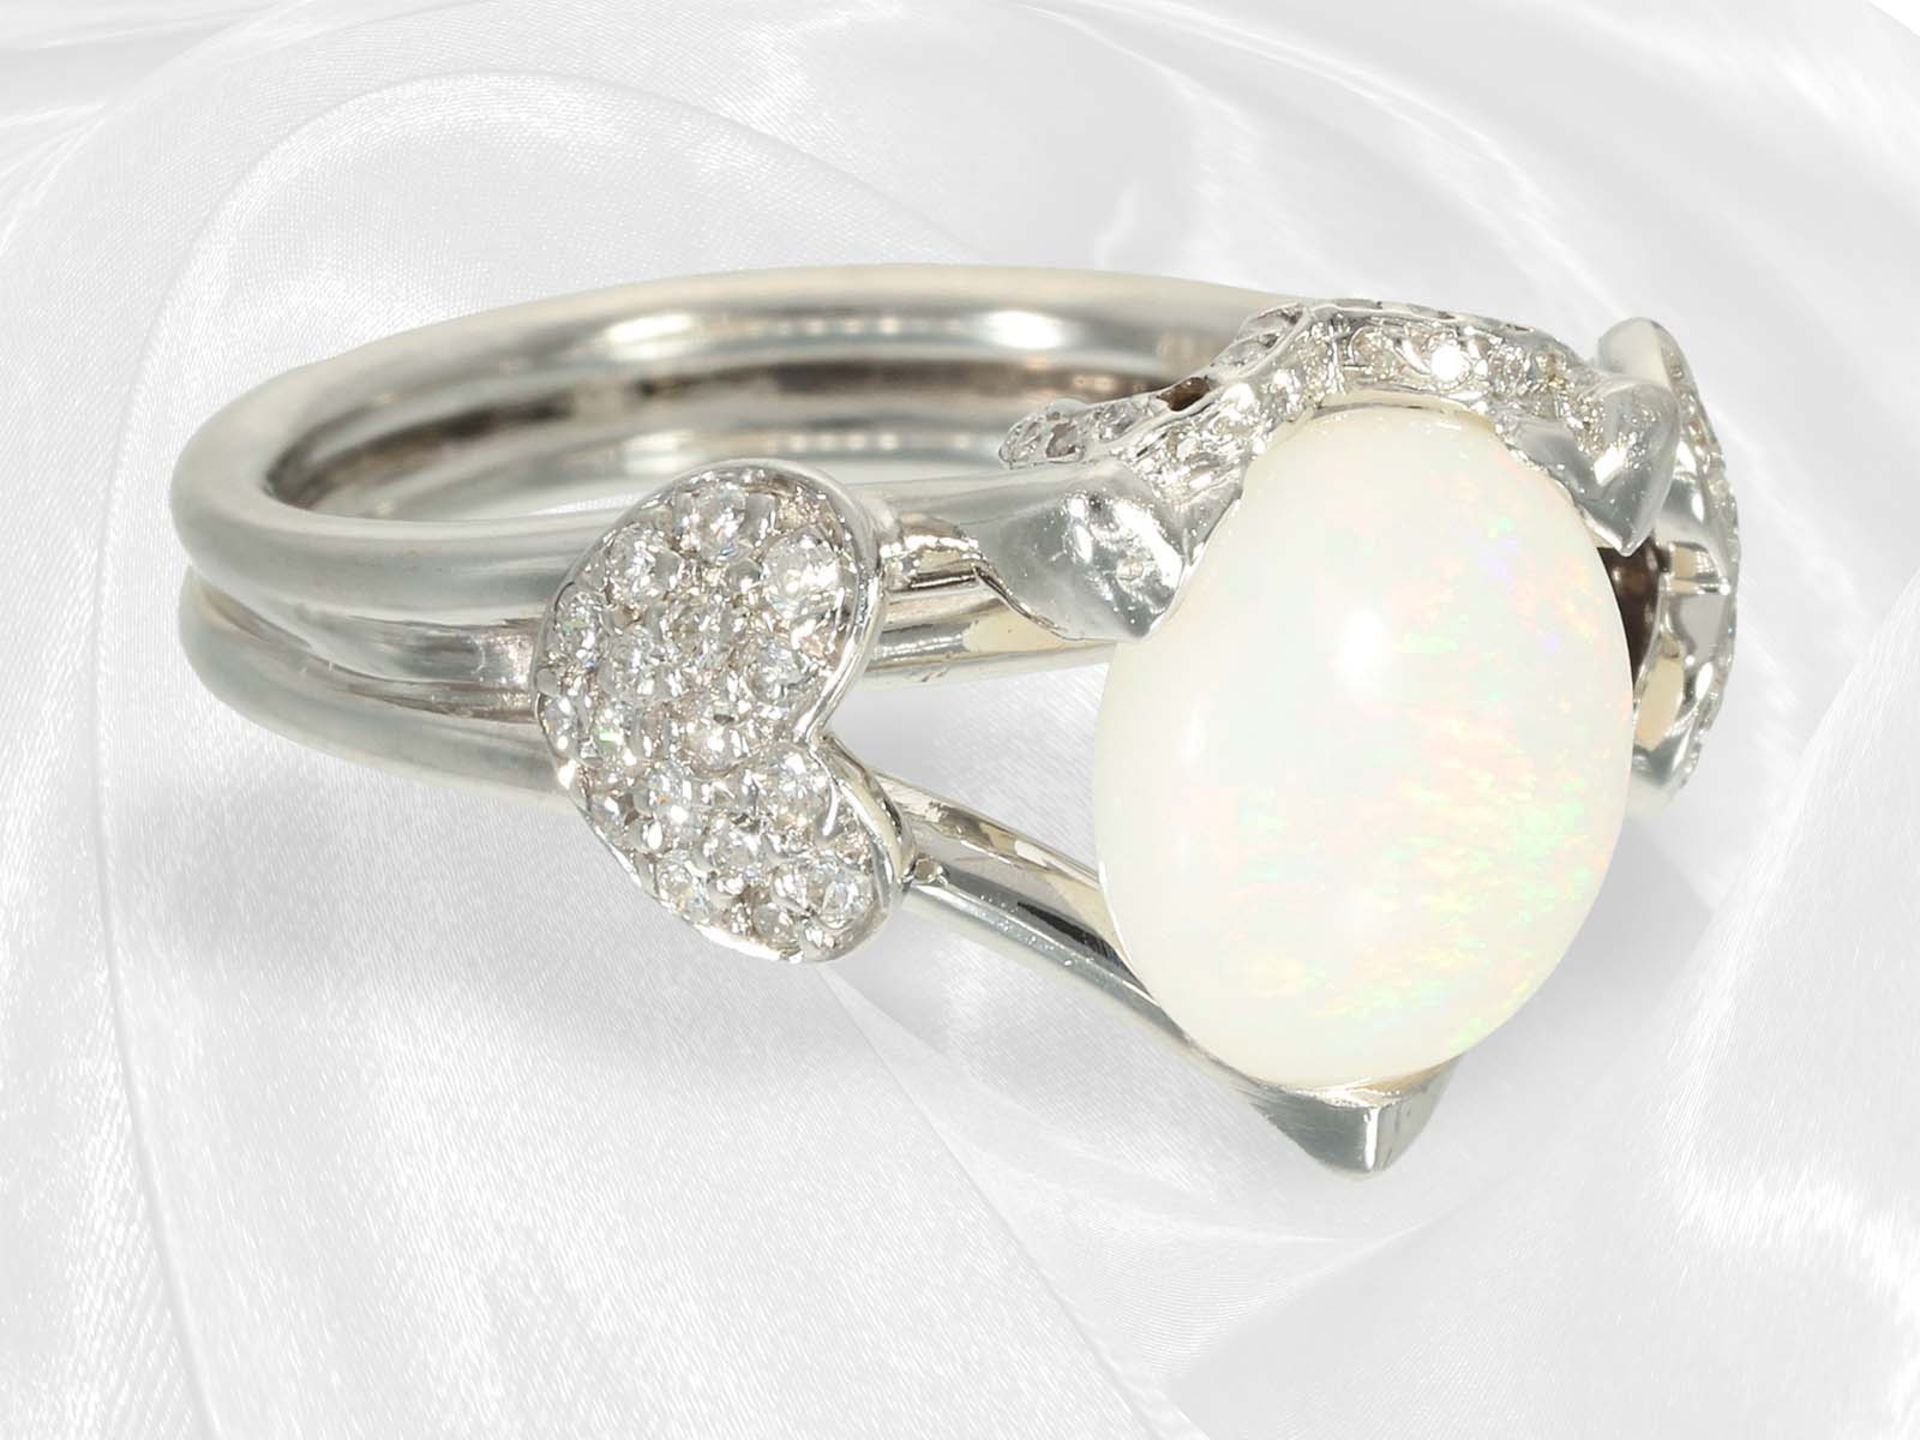 Fancy designer goldsmith ring with opal and brilliant-cut diamonds, "Hearts", 18K white gold, handma - Image 4 of 5